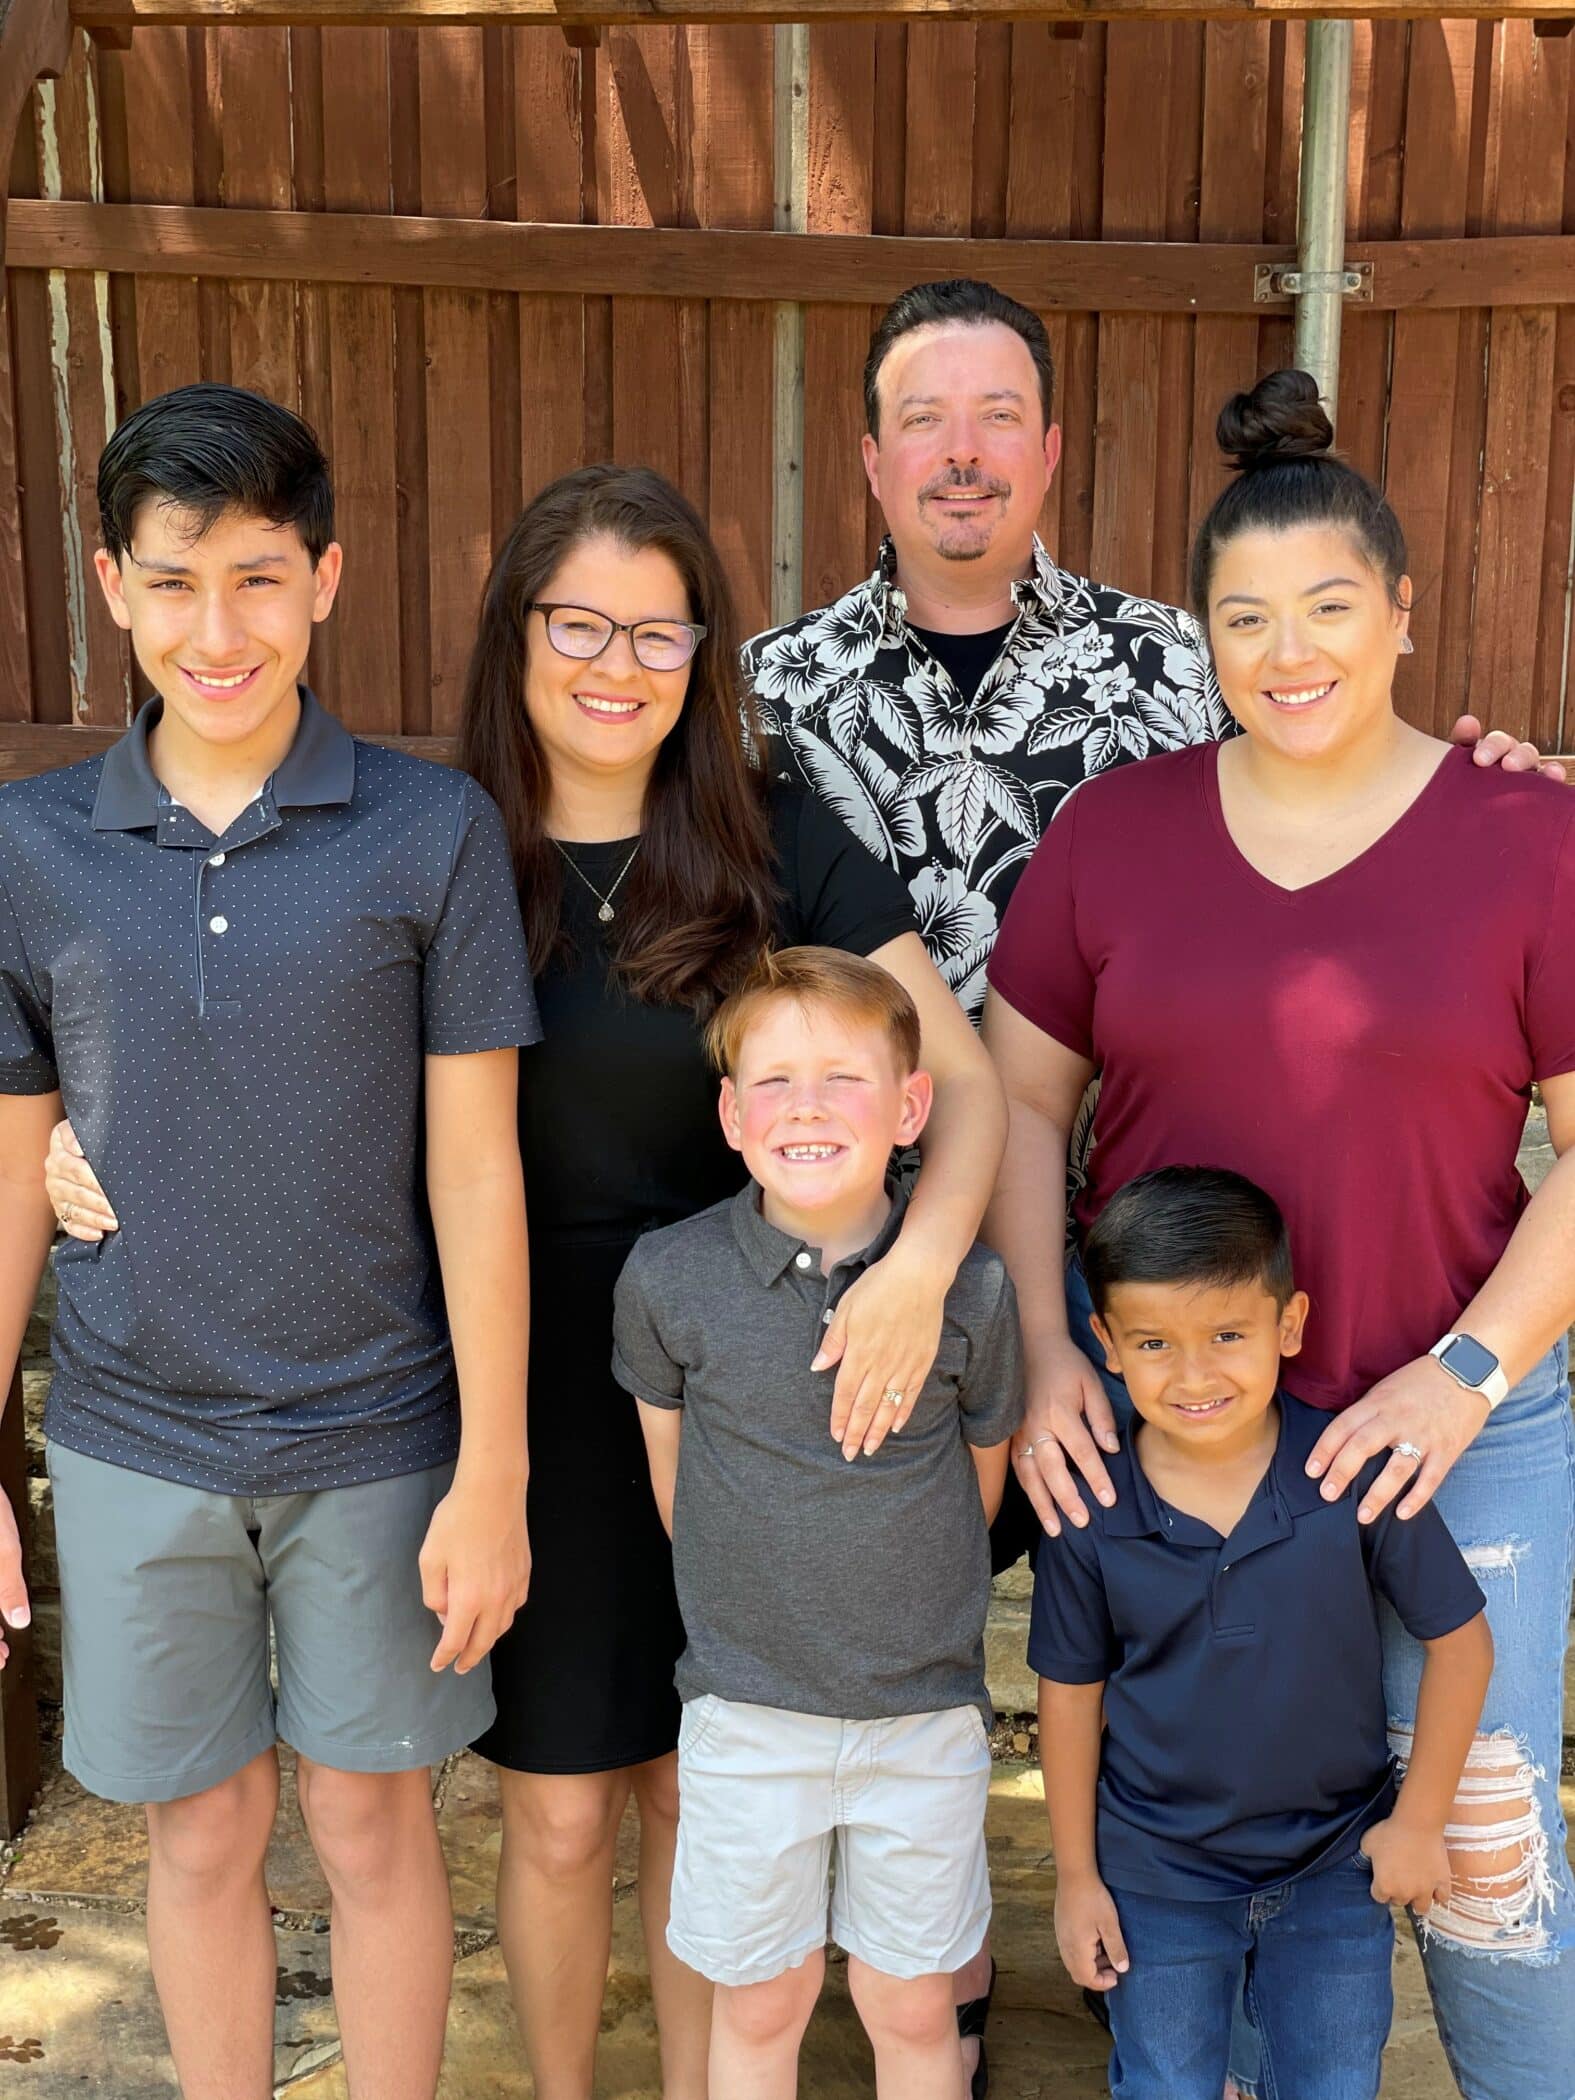 The Sidwell family went through ACH Child and Family Services for their adoption process.